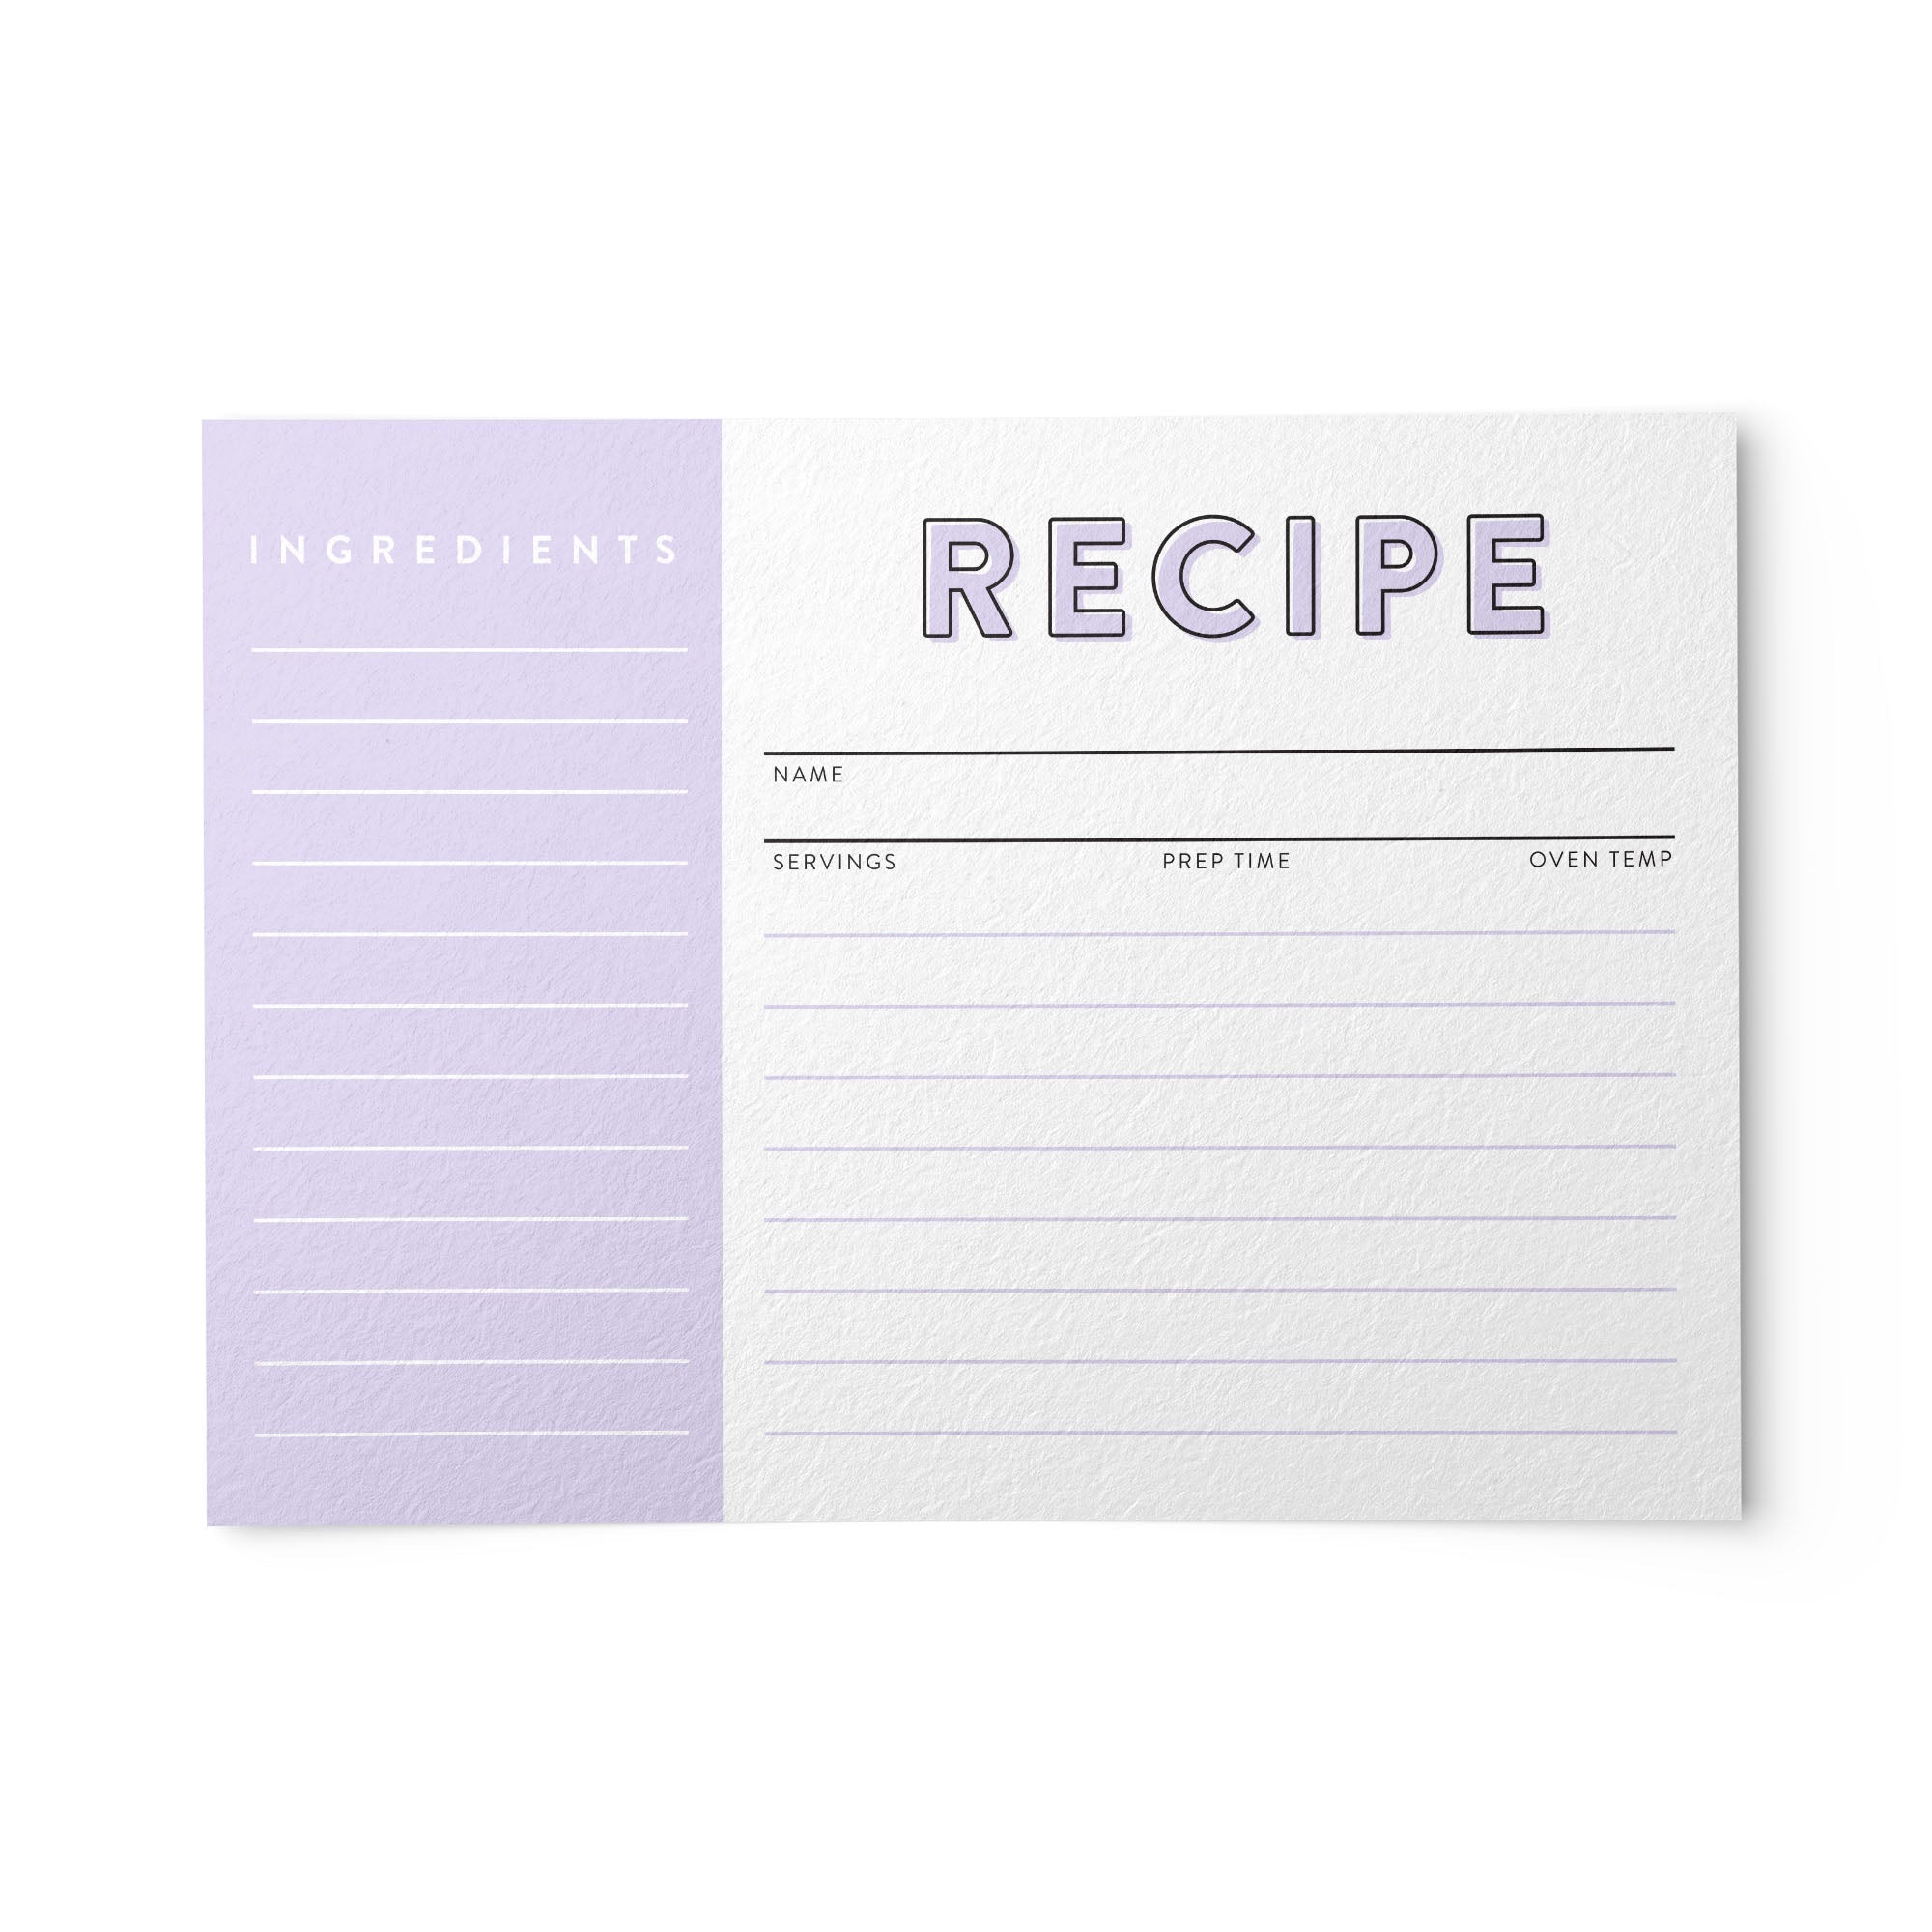 4x6 inch Printable Index Cards Template